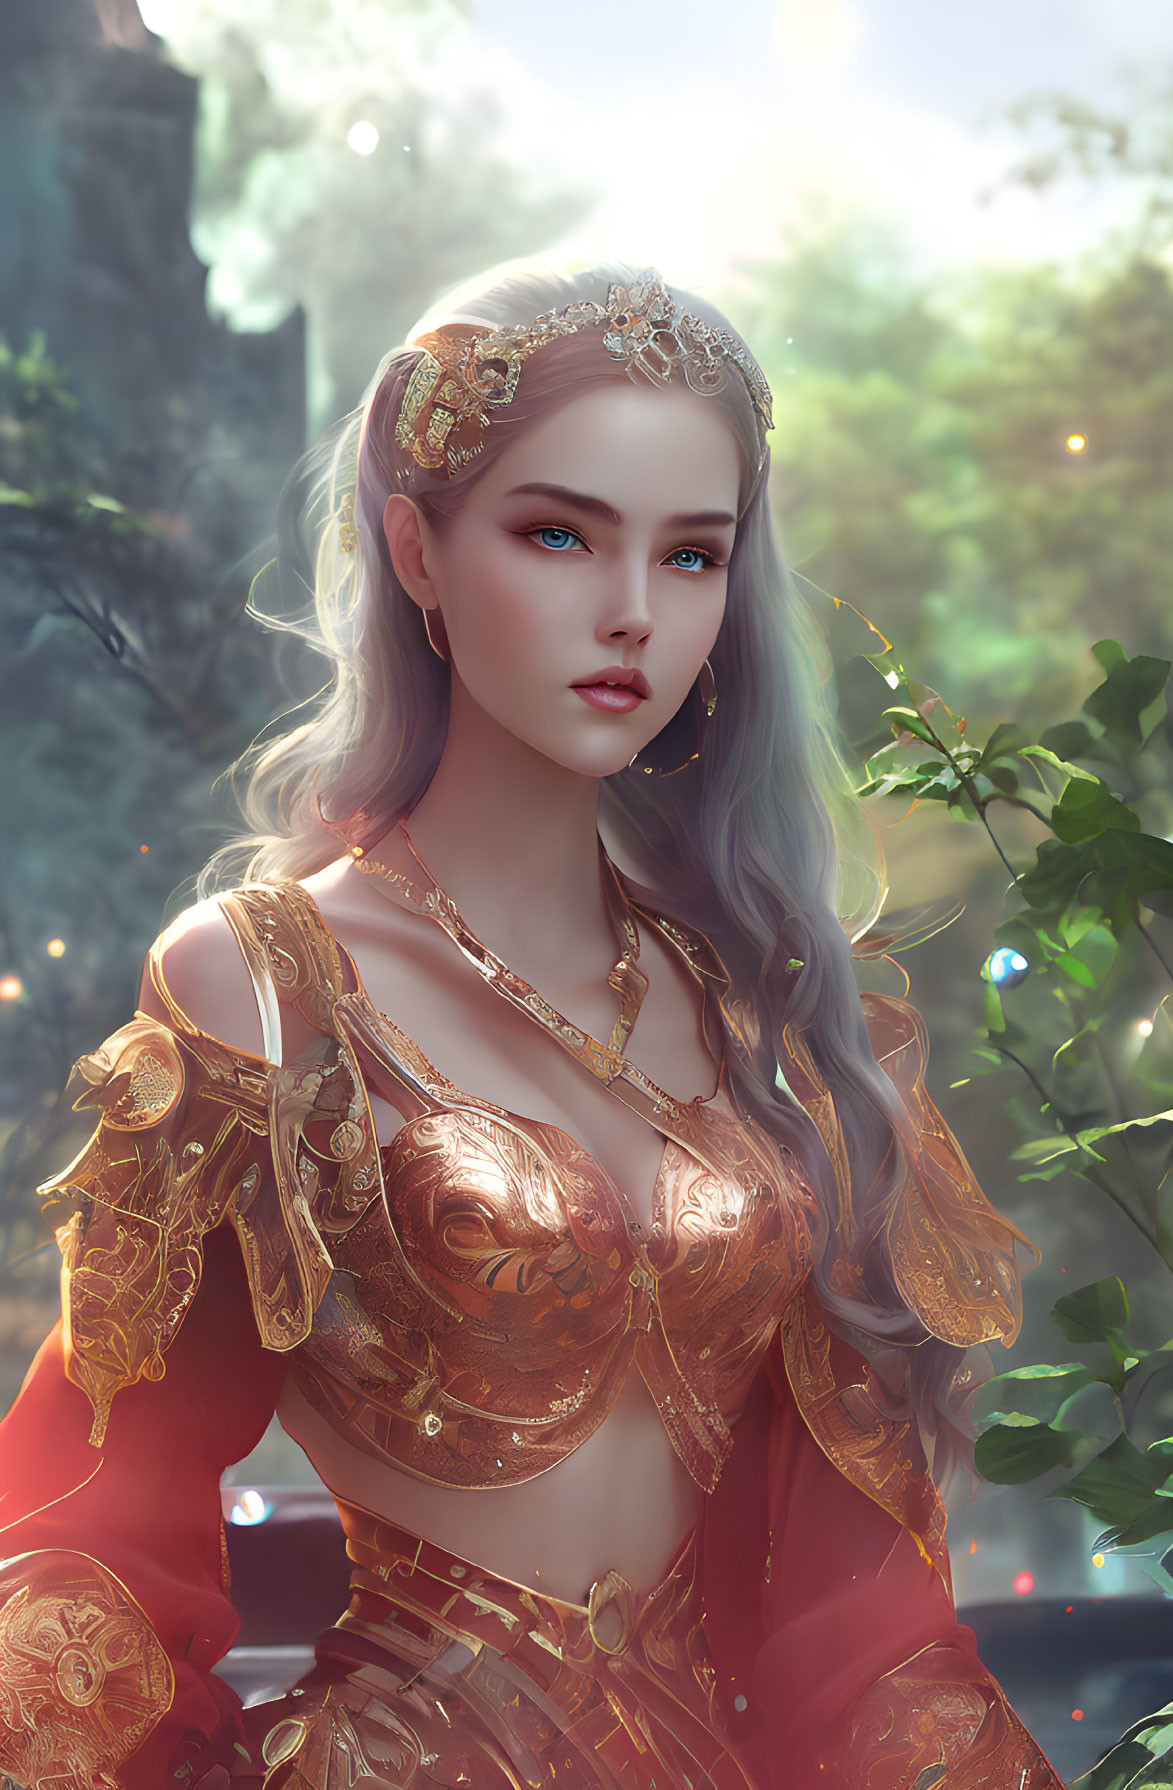 Fantasy illustration of woman in gold crown and armor in magical forest